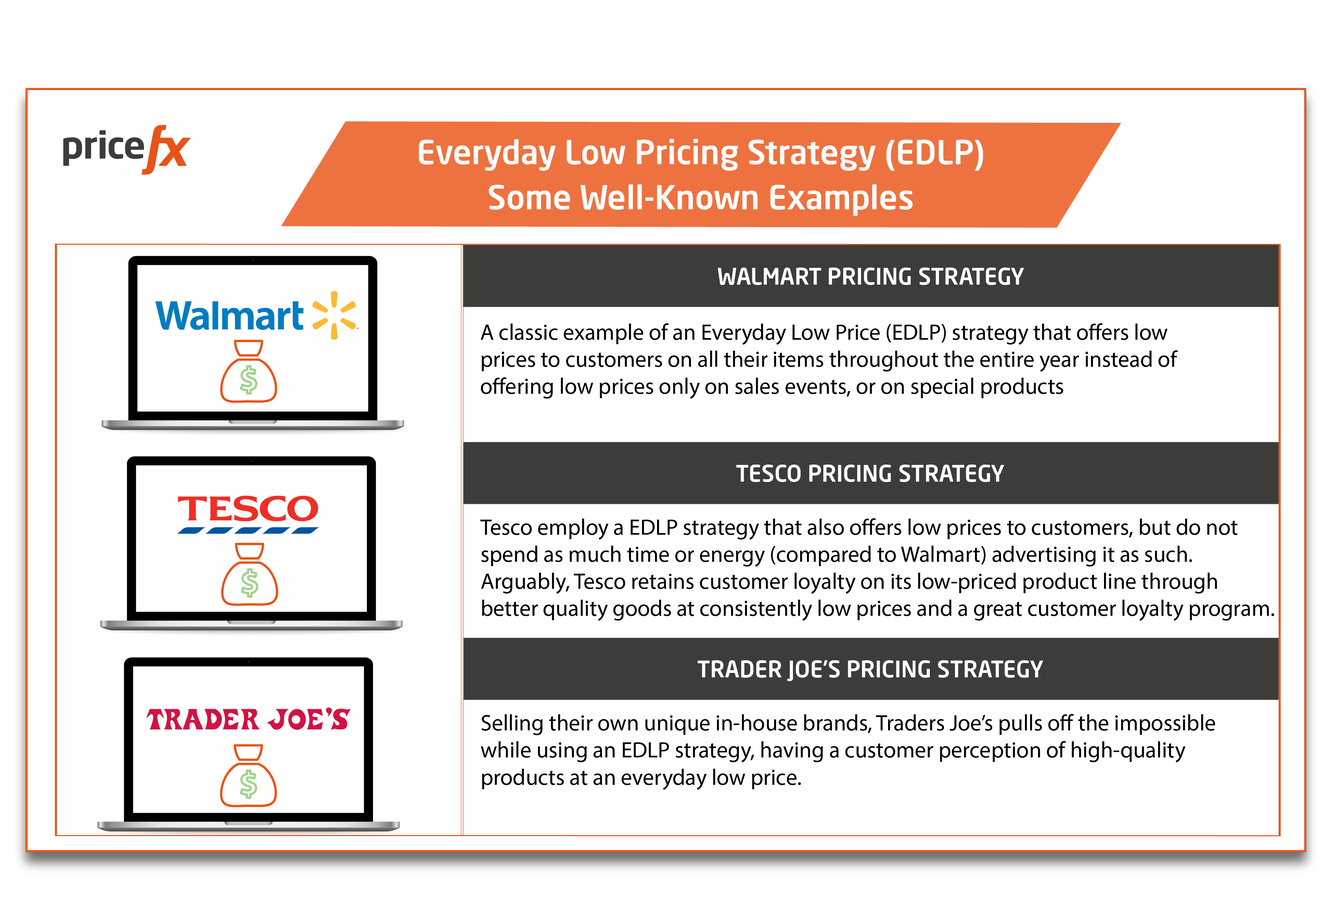 Everyday-Low-Pricing-Strategy-EDLP-Well-Known-Examples